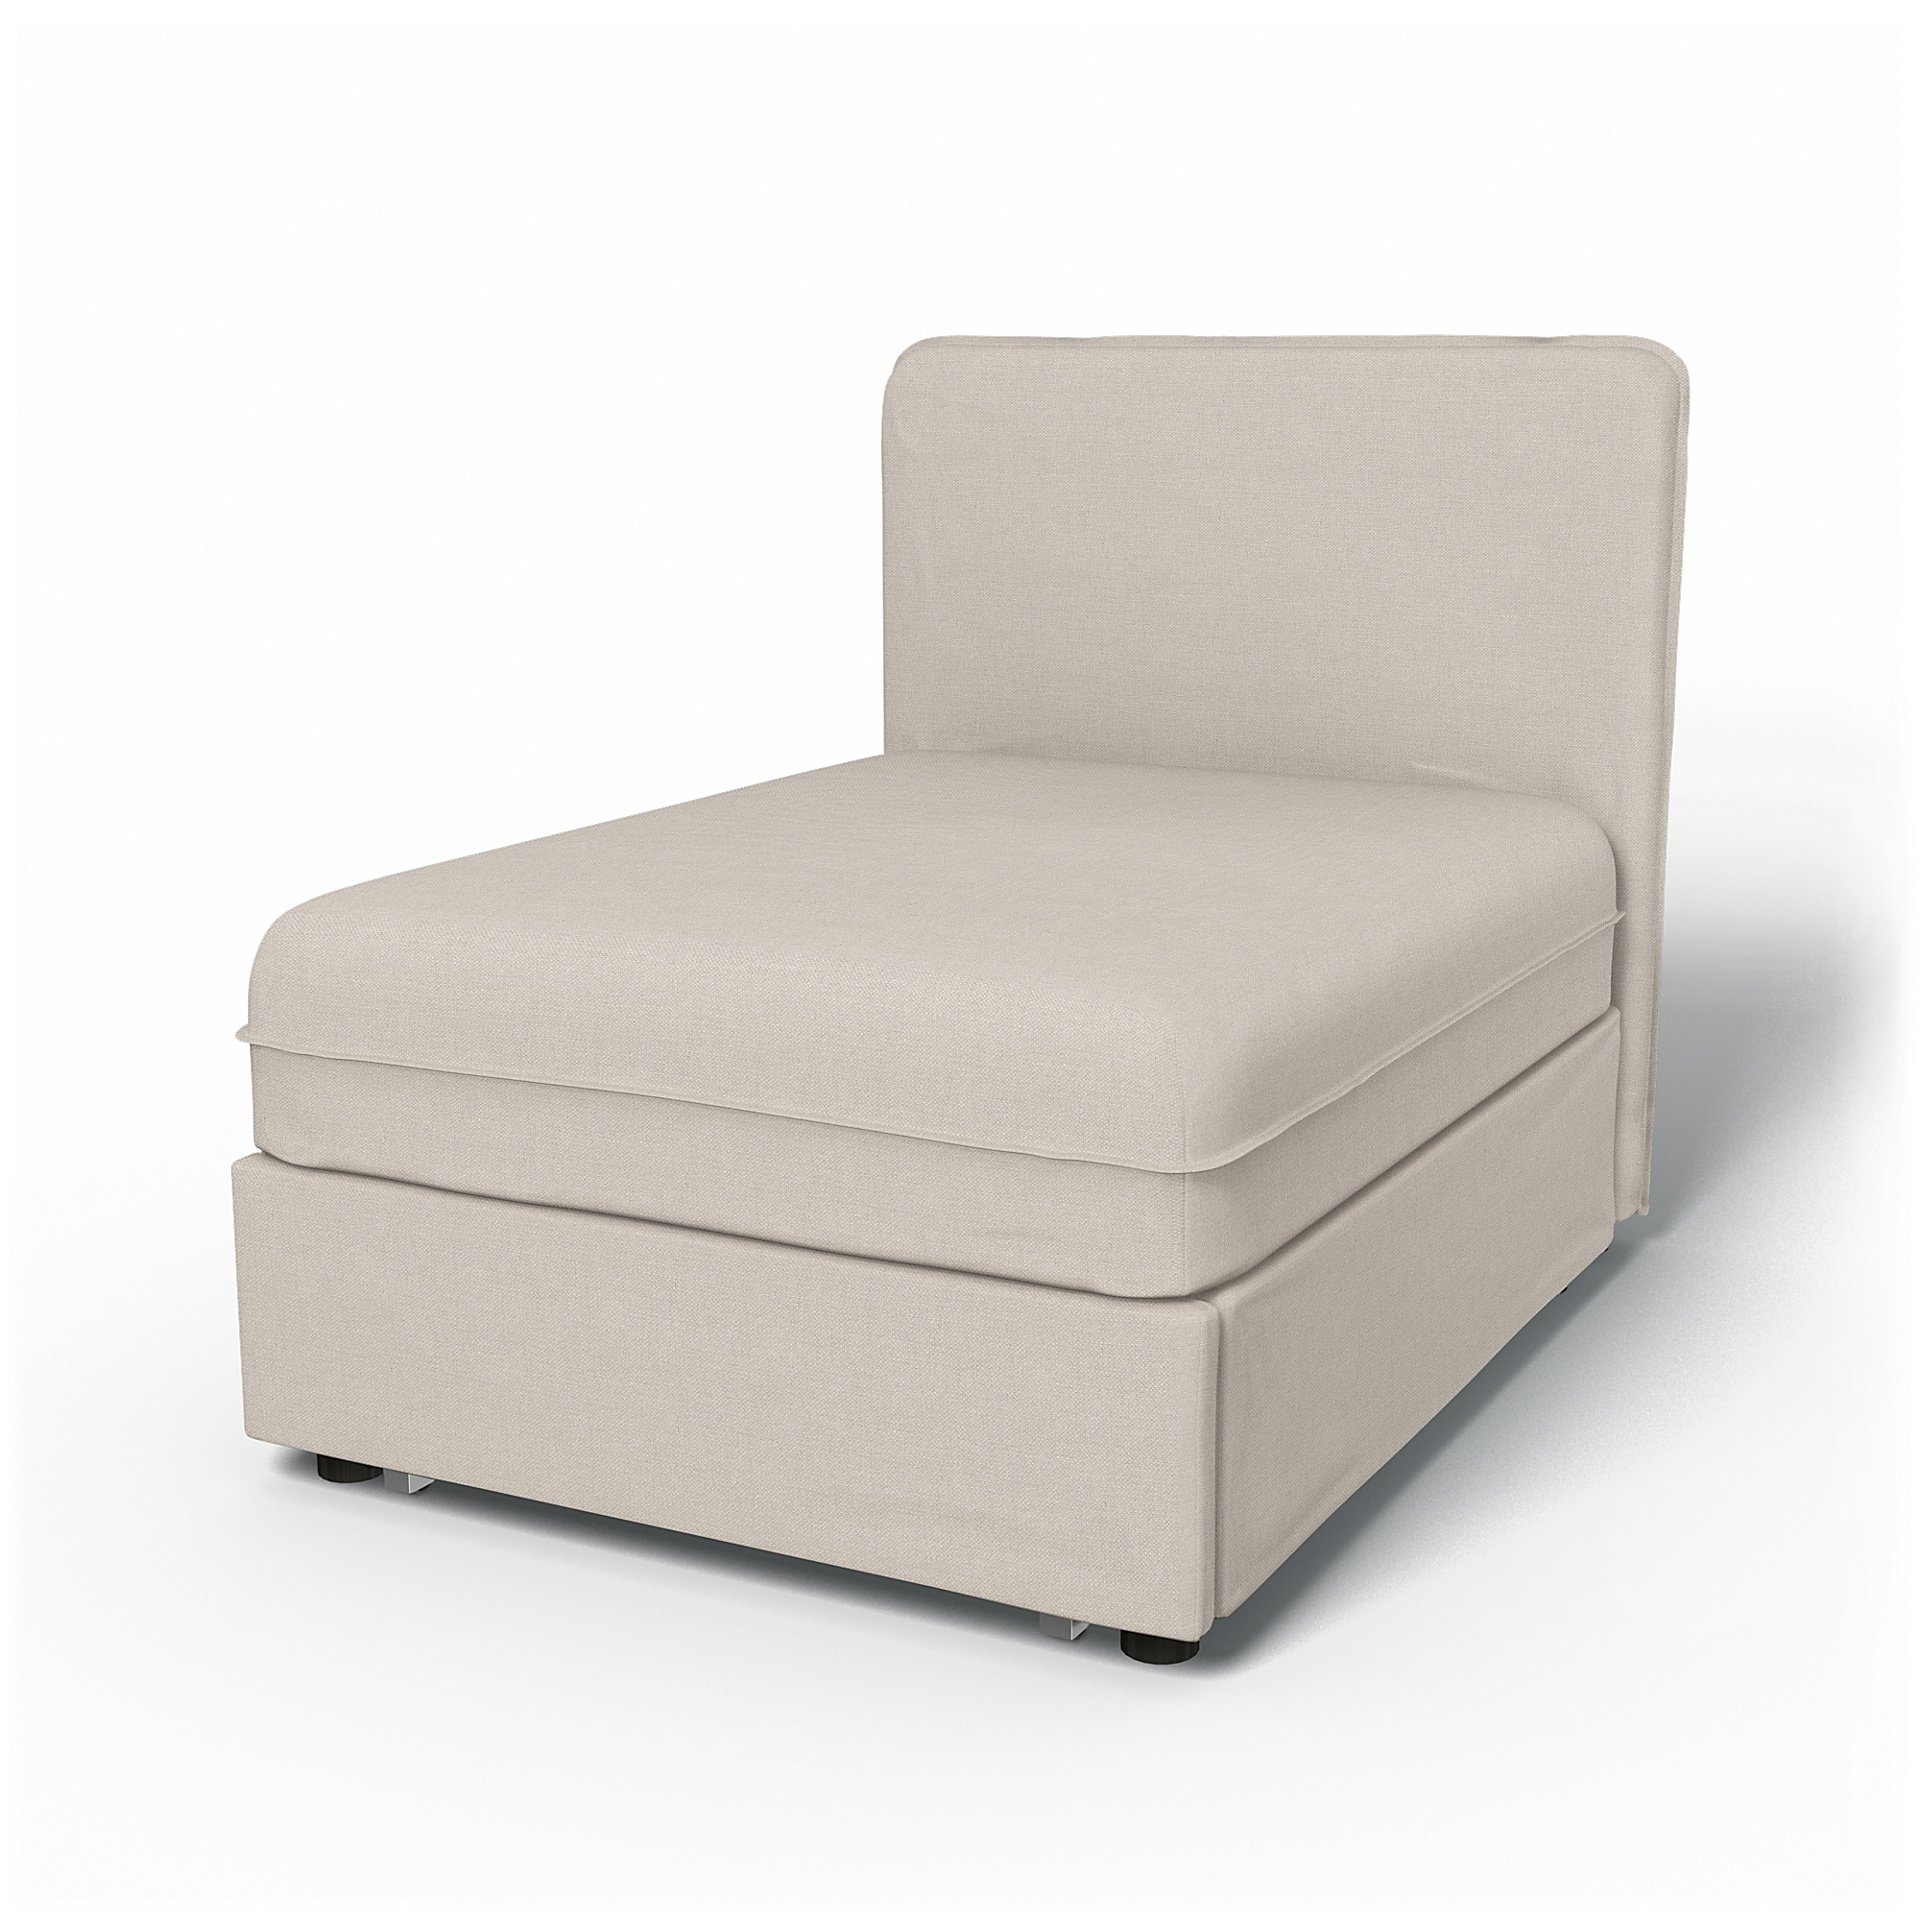 IKEA - Vallentuna Seat Module with Low Back Sofa Bed Cover 80x100 cm 32x39in, Chalk, Linen - Bemz